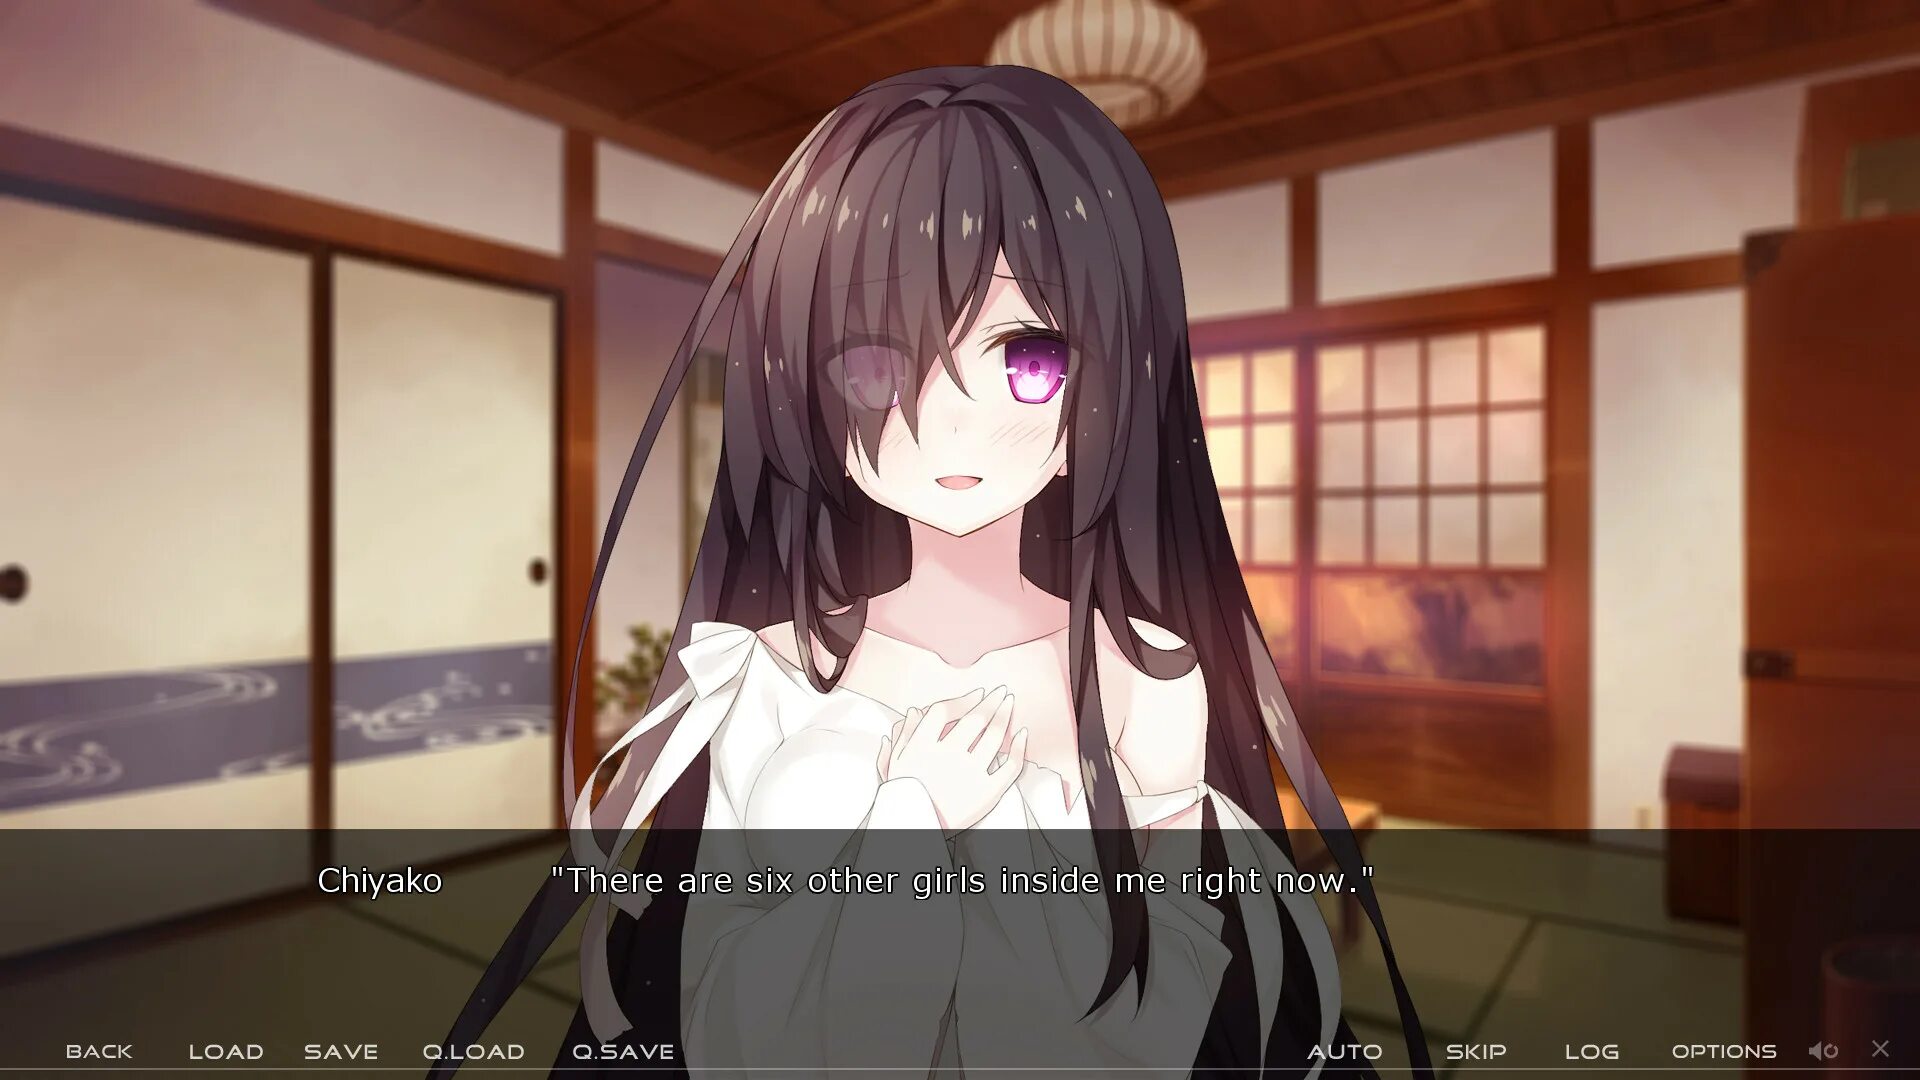 Seven Days: Anata to Sugosu Nanokakan. 7 Days новелла. Seven Days game Mystery Visual novel. 14 Days with you новелла.